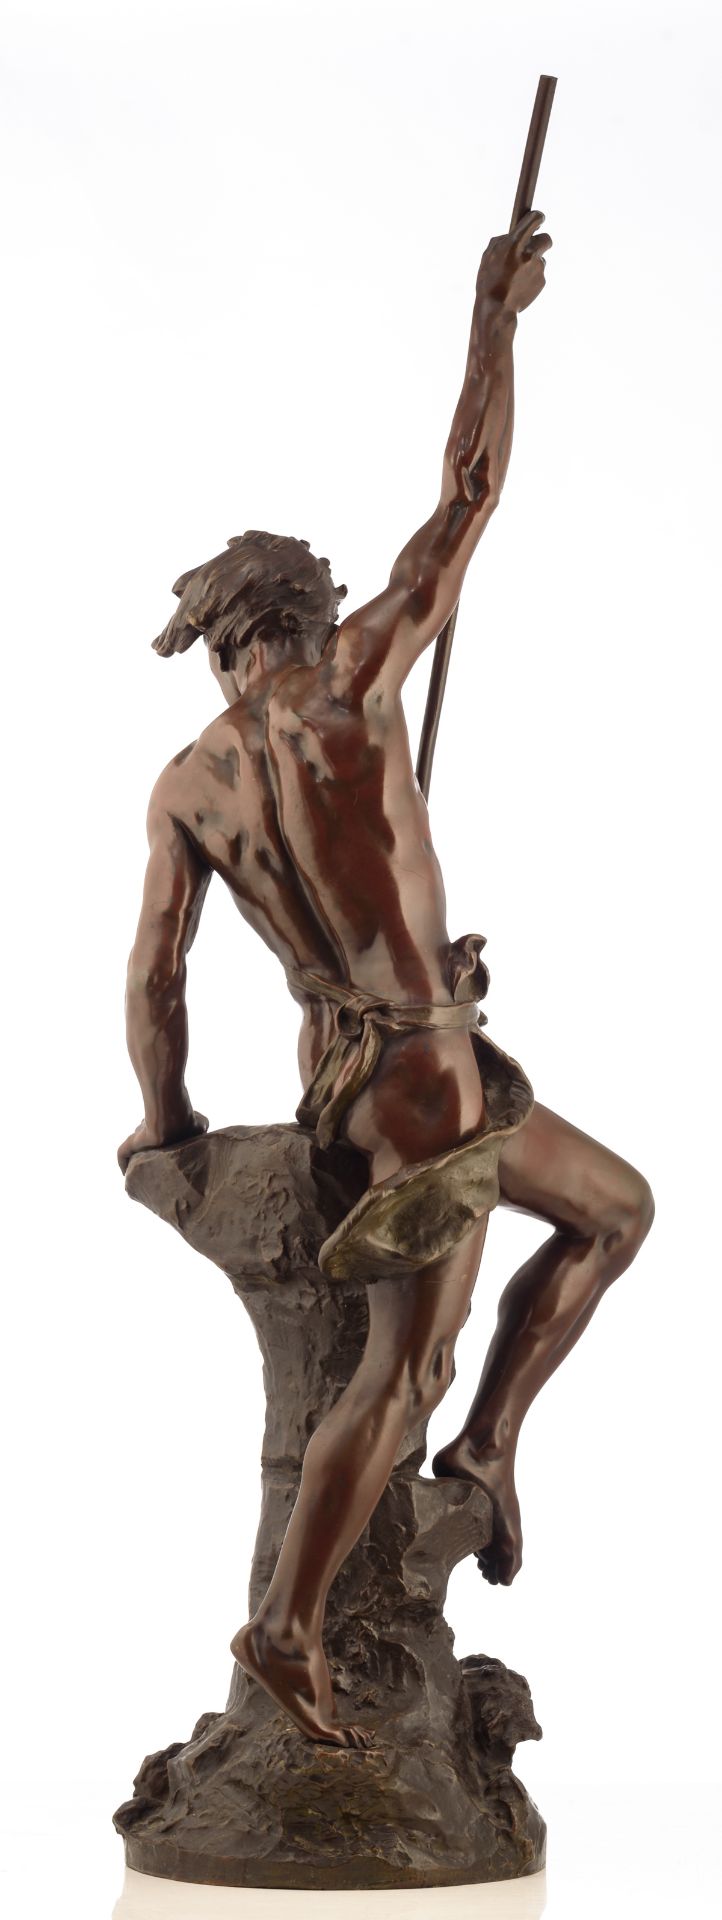 Ferrand E.J., a fisherman with his harpoon, patinated bronze, H 116 cm - Image 3 of 6